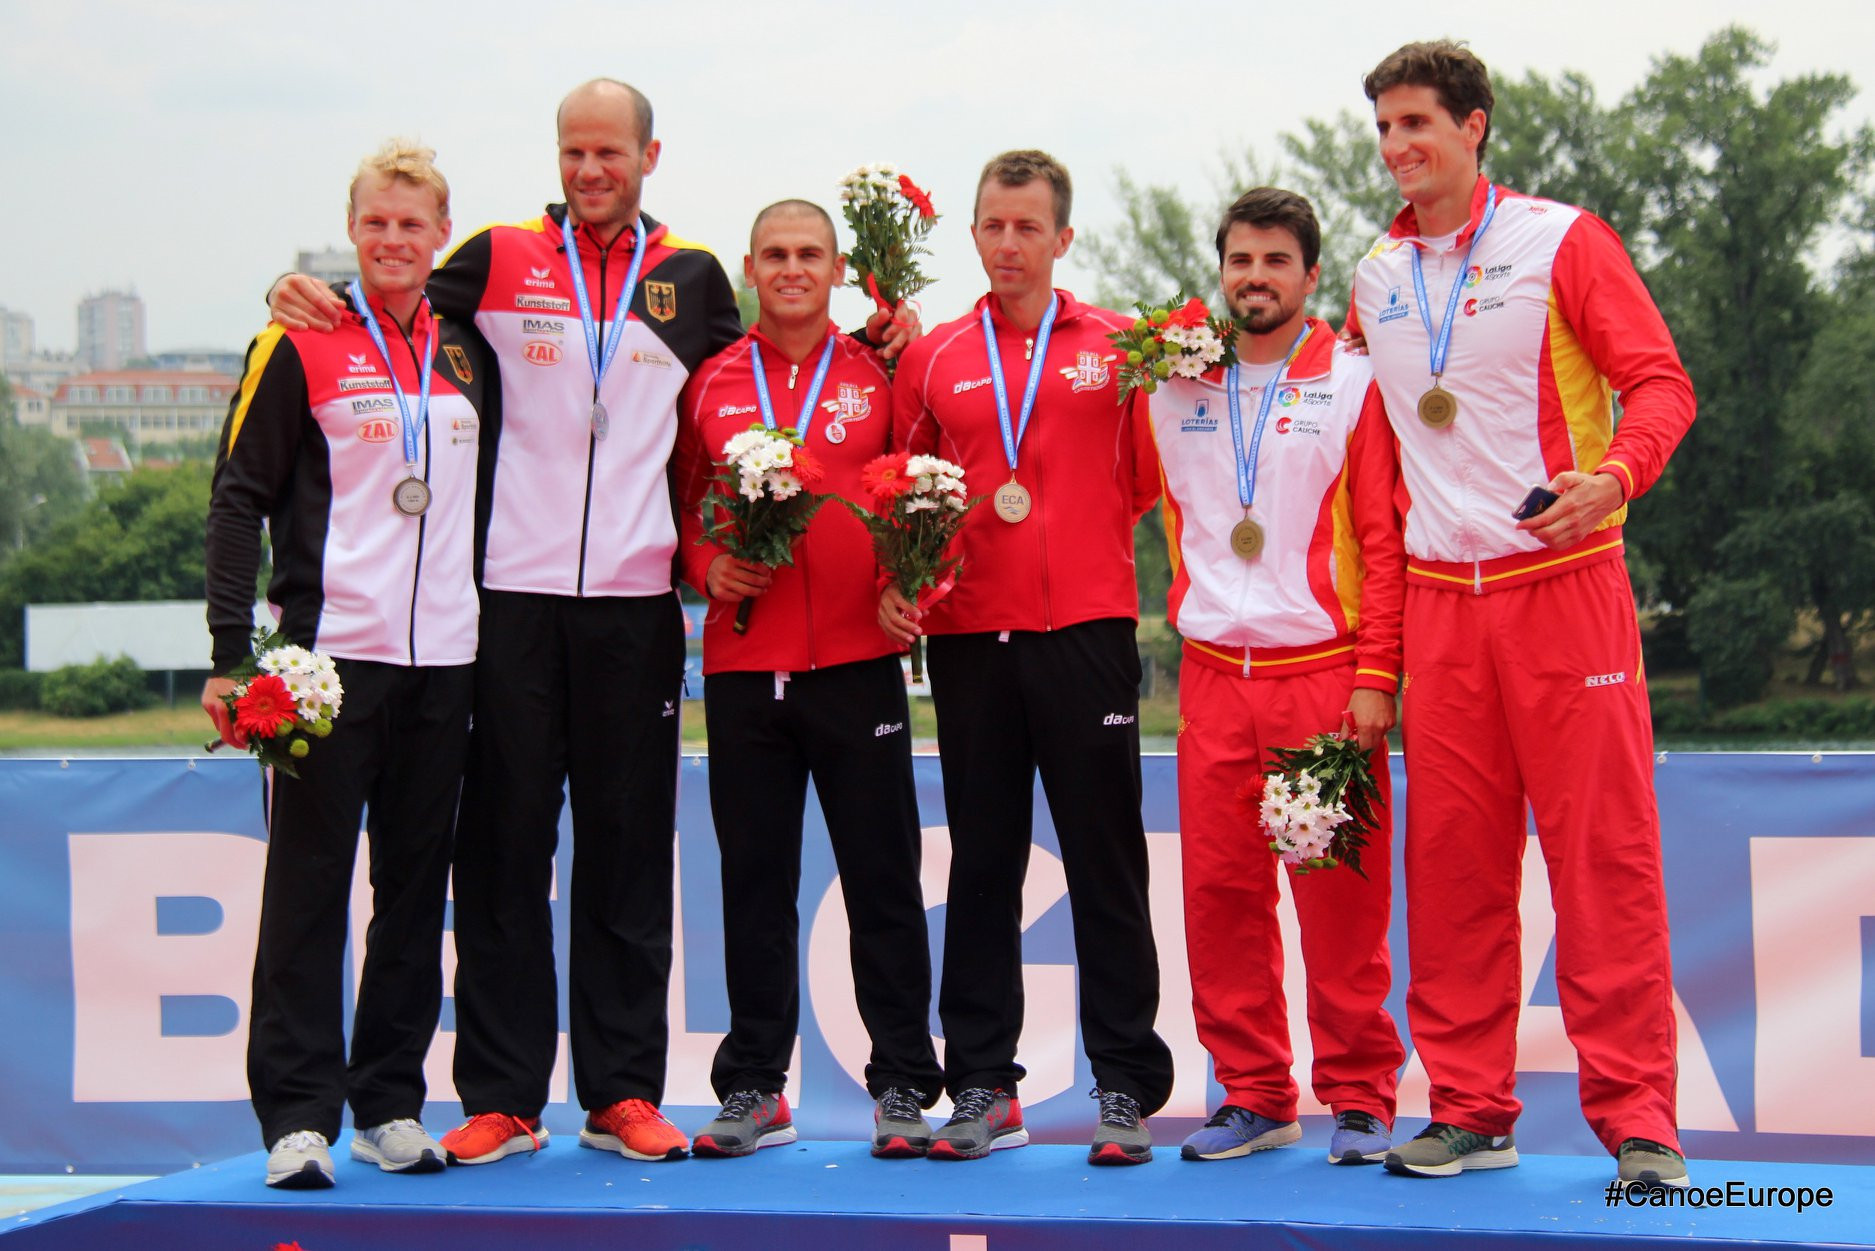 Home success for Serbia at European Canoe Sprint Championships